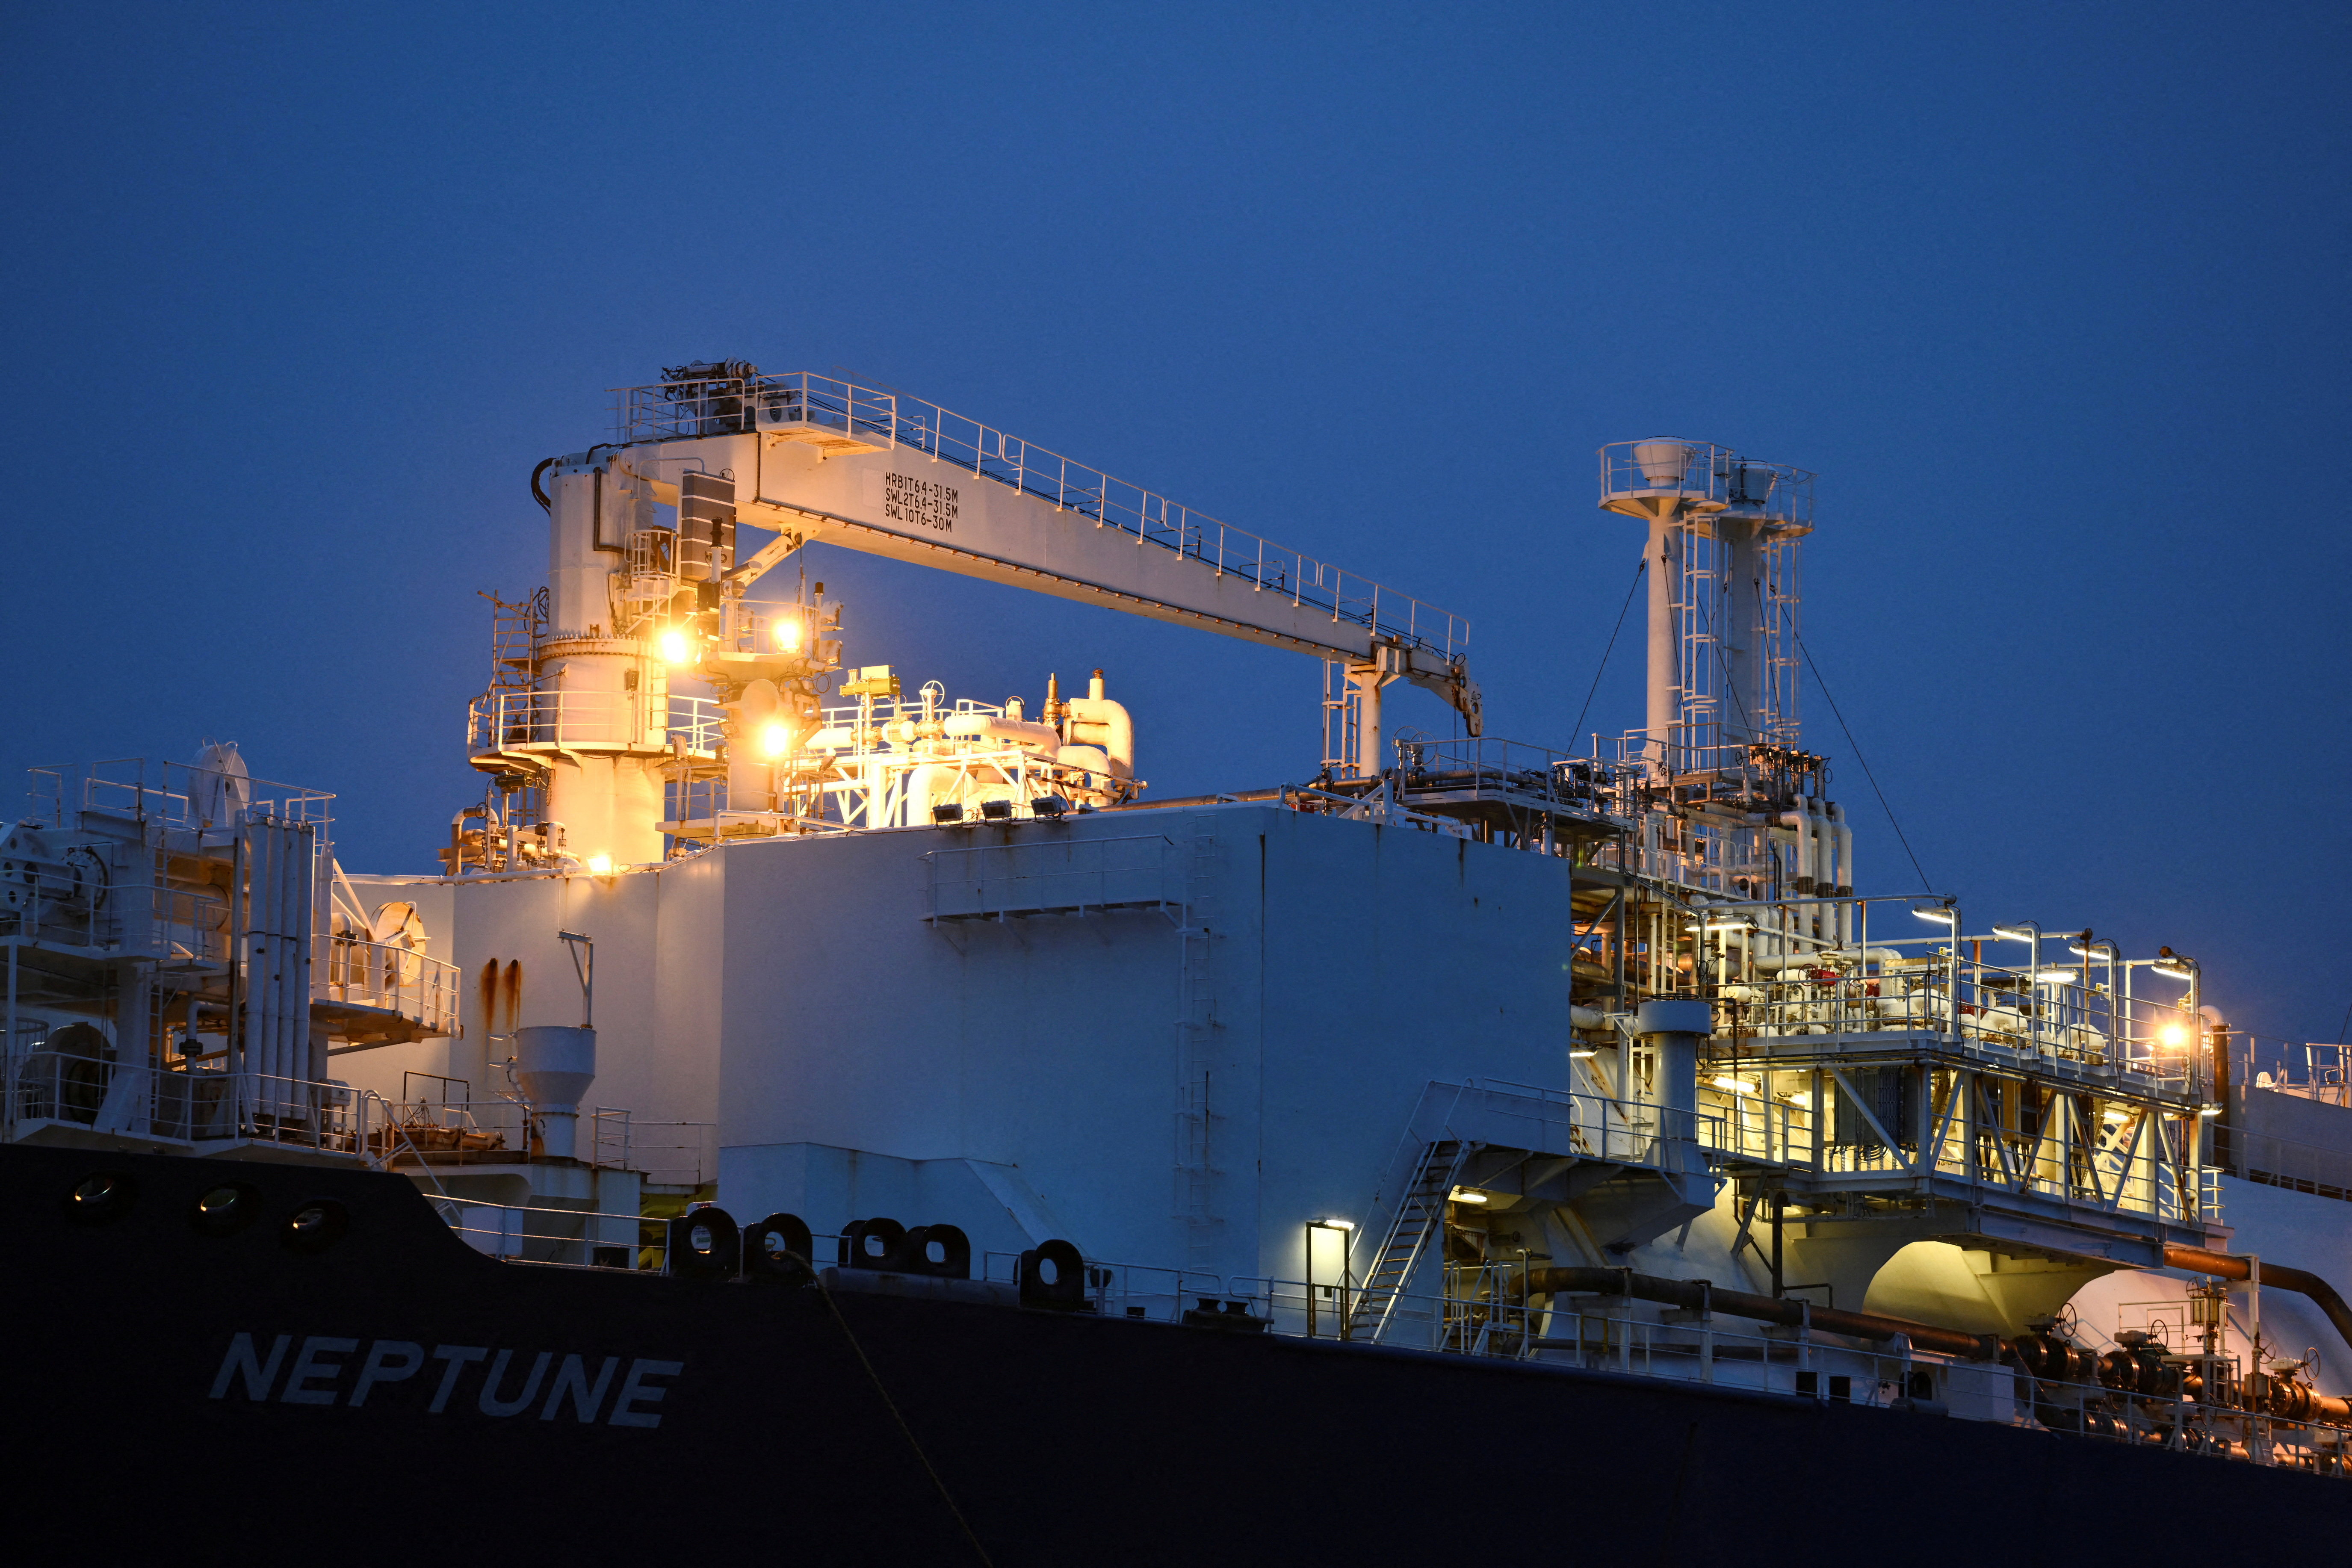 Germany inaugurates Liquefied Natural Gas (LNG) terminal 'Deutsche Ostsee' in Lubmin